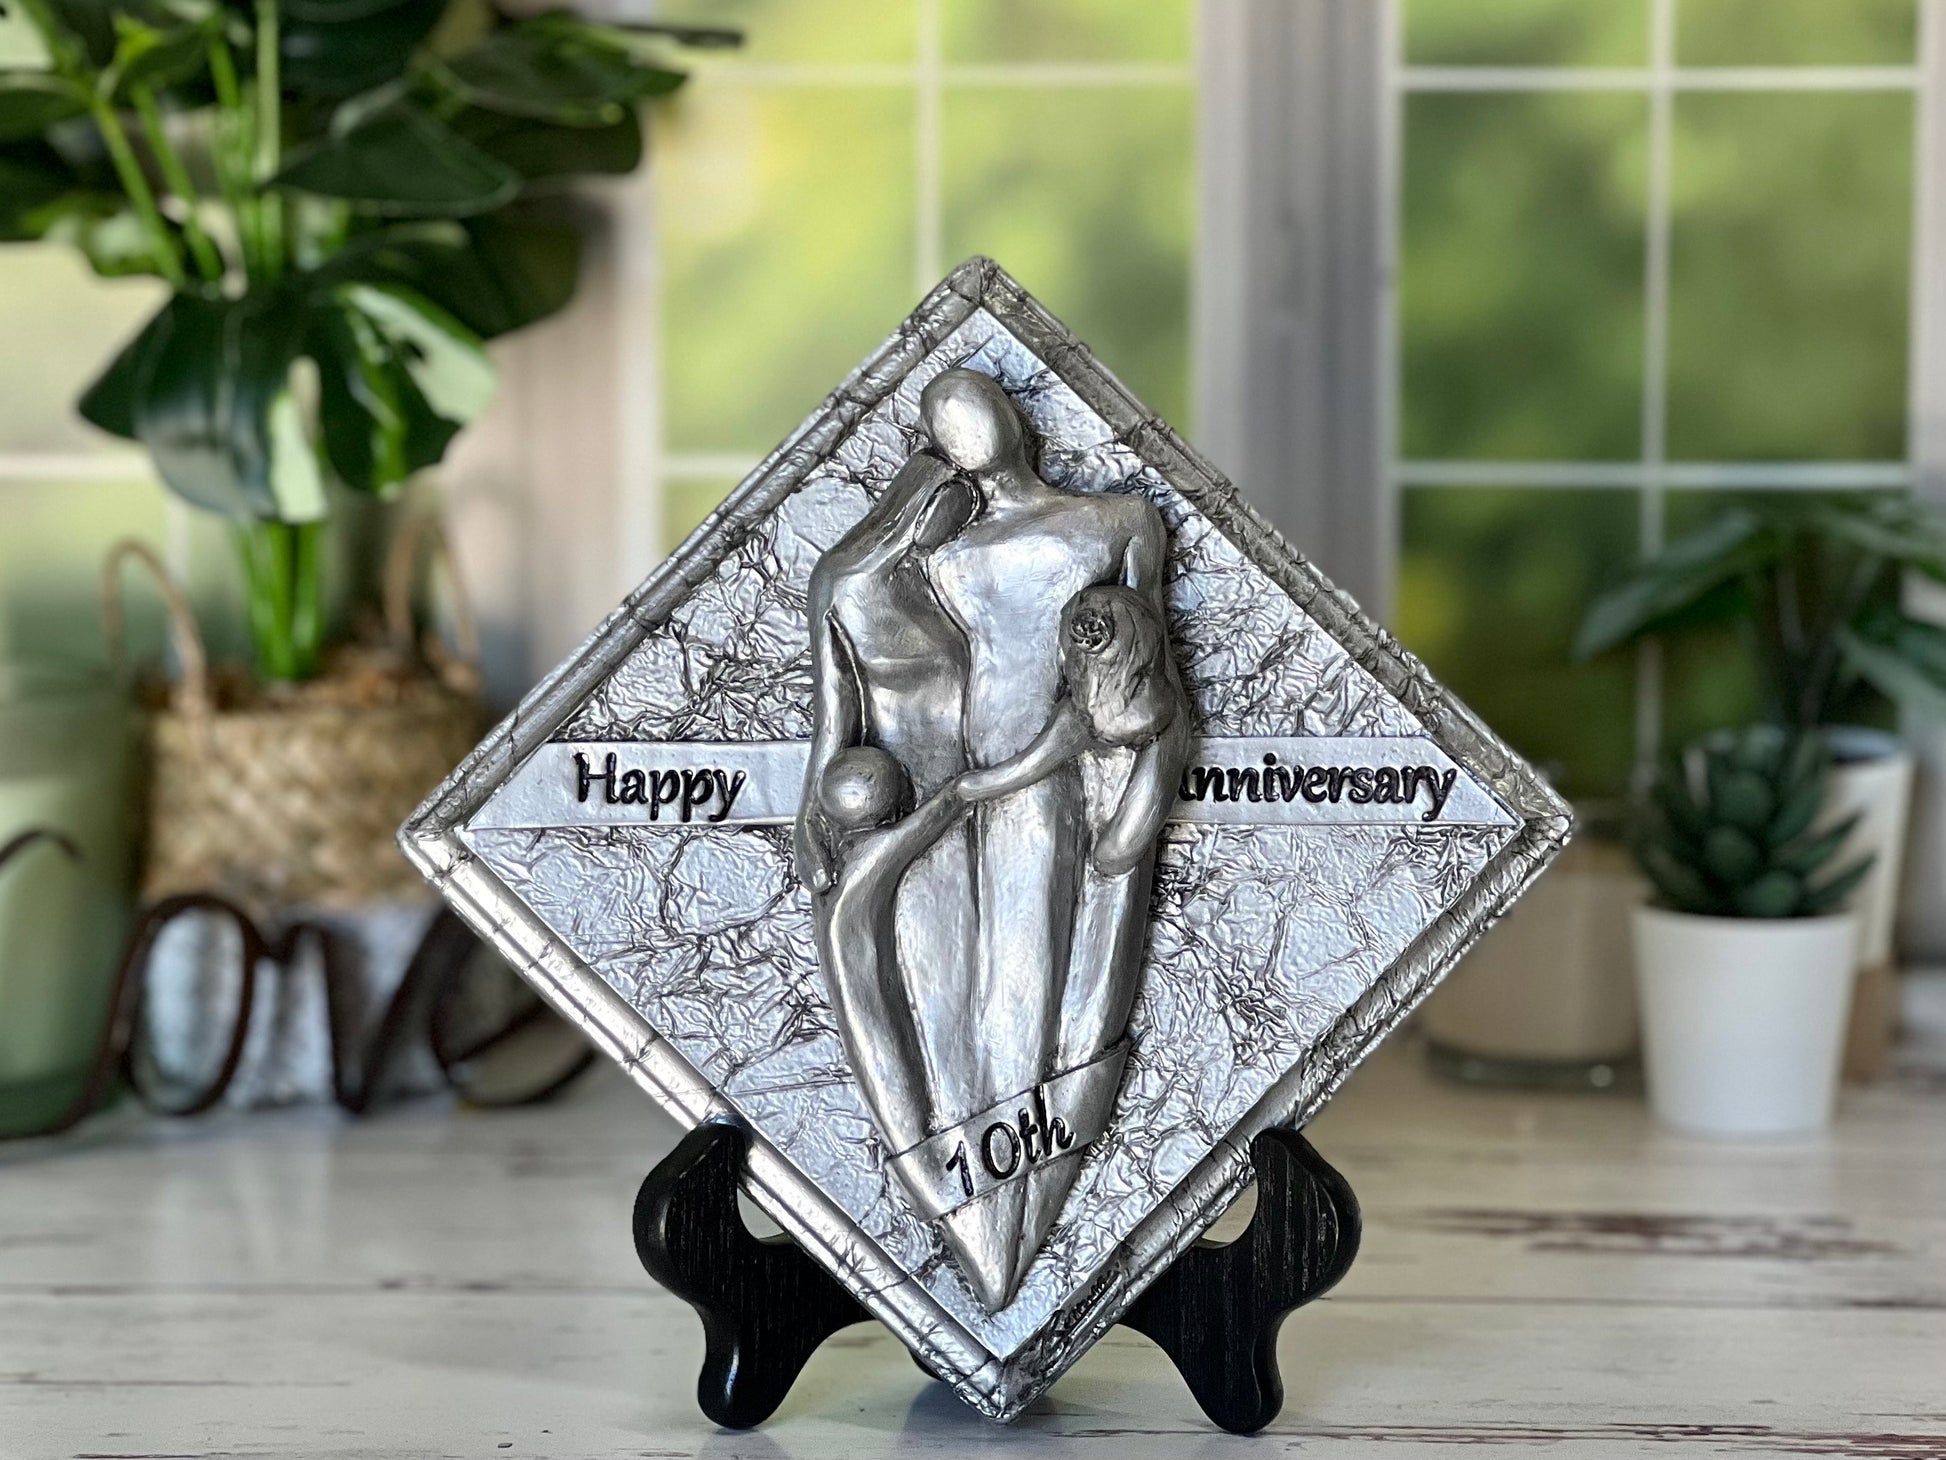 Unique Anniversary Gifts for Husband On Your 10th Wedding Anniversary